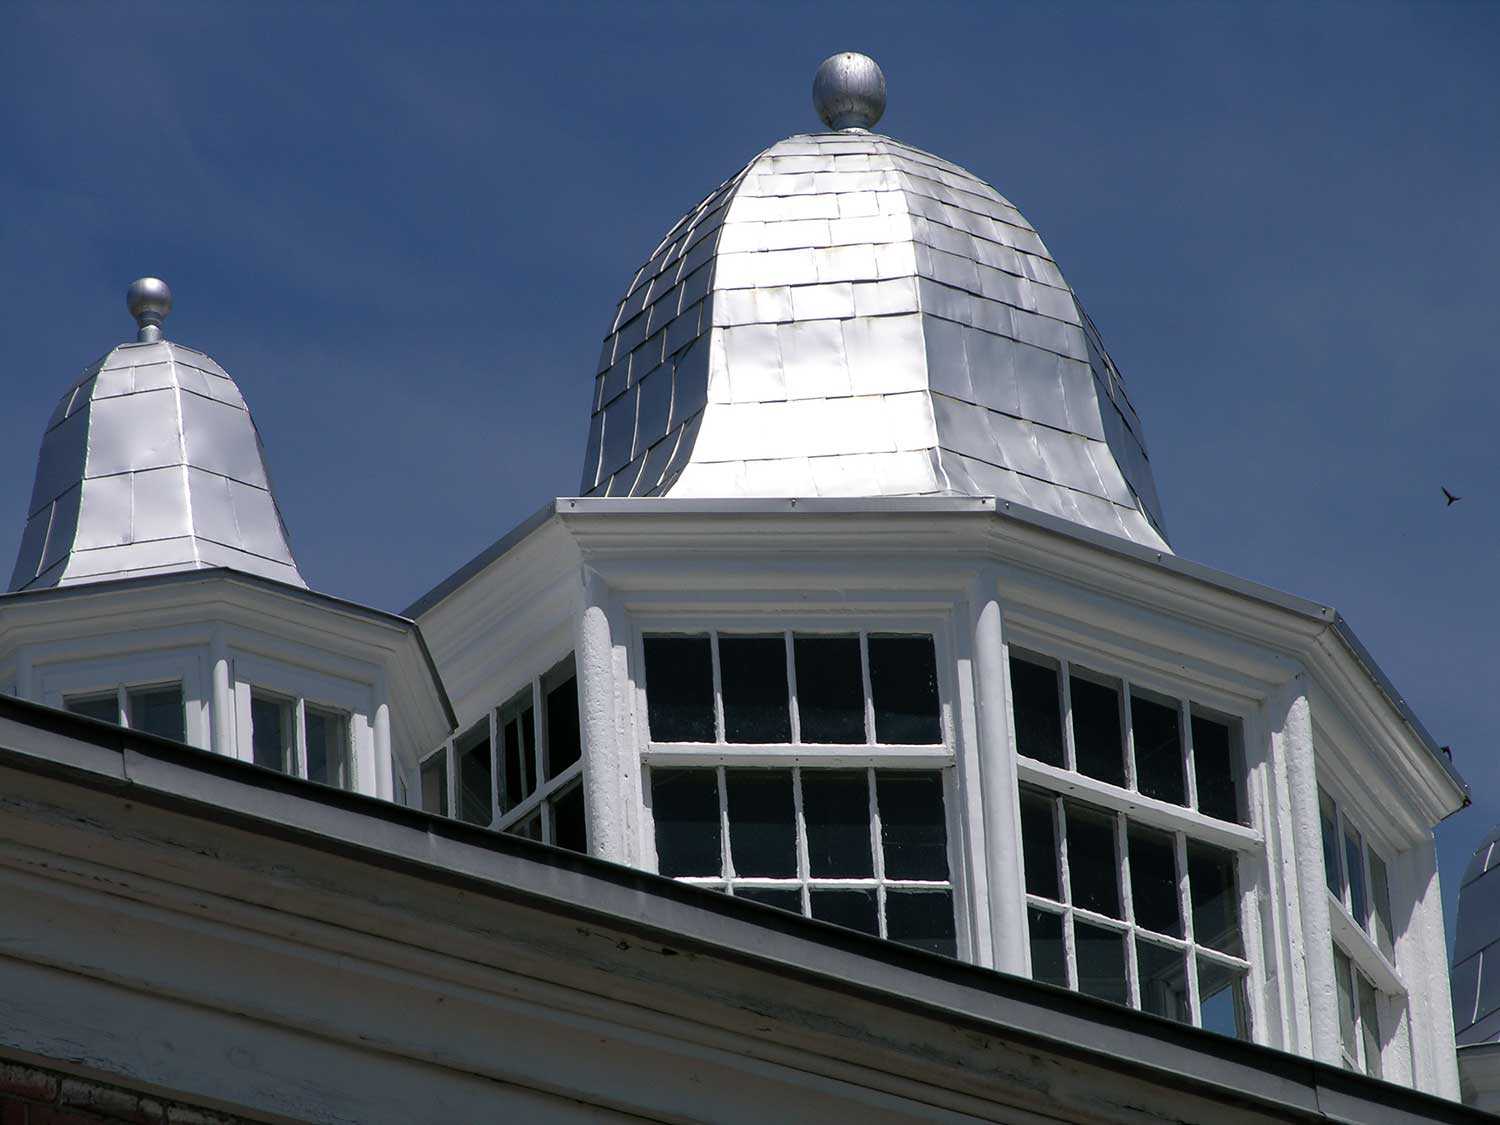 This decorative cupola adorns McMartin House, a Foundation property in Perth